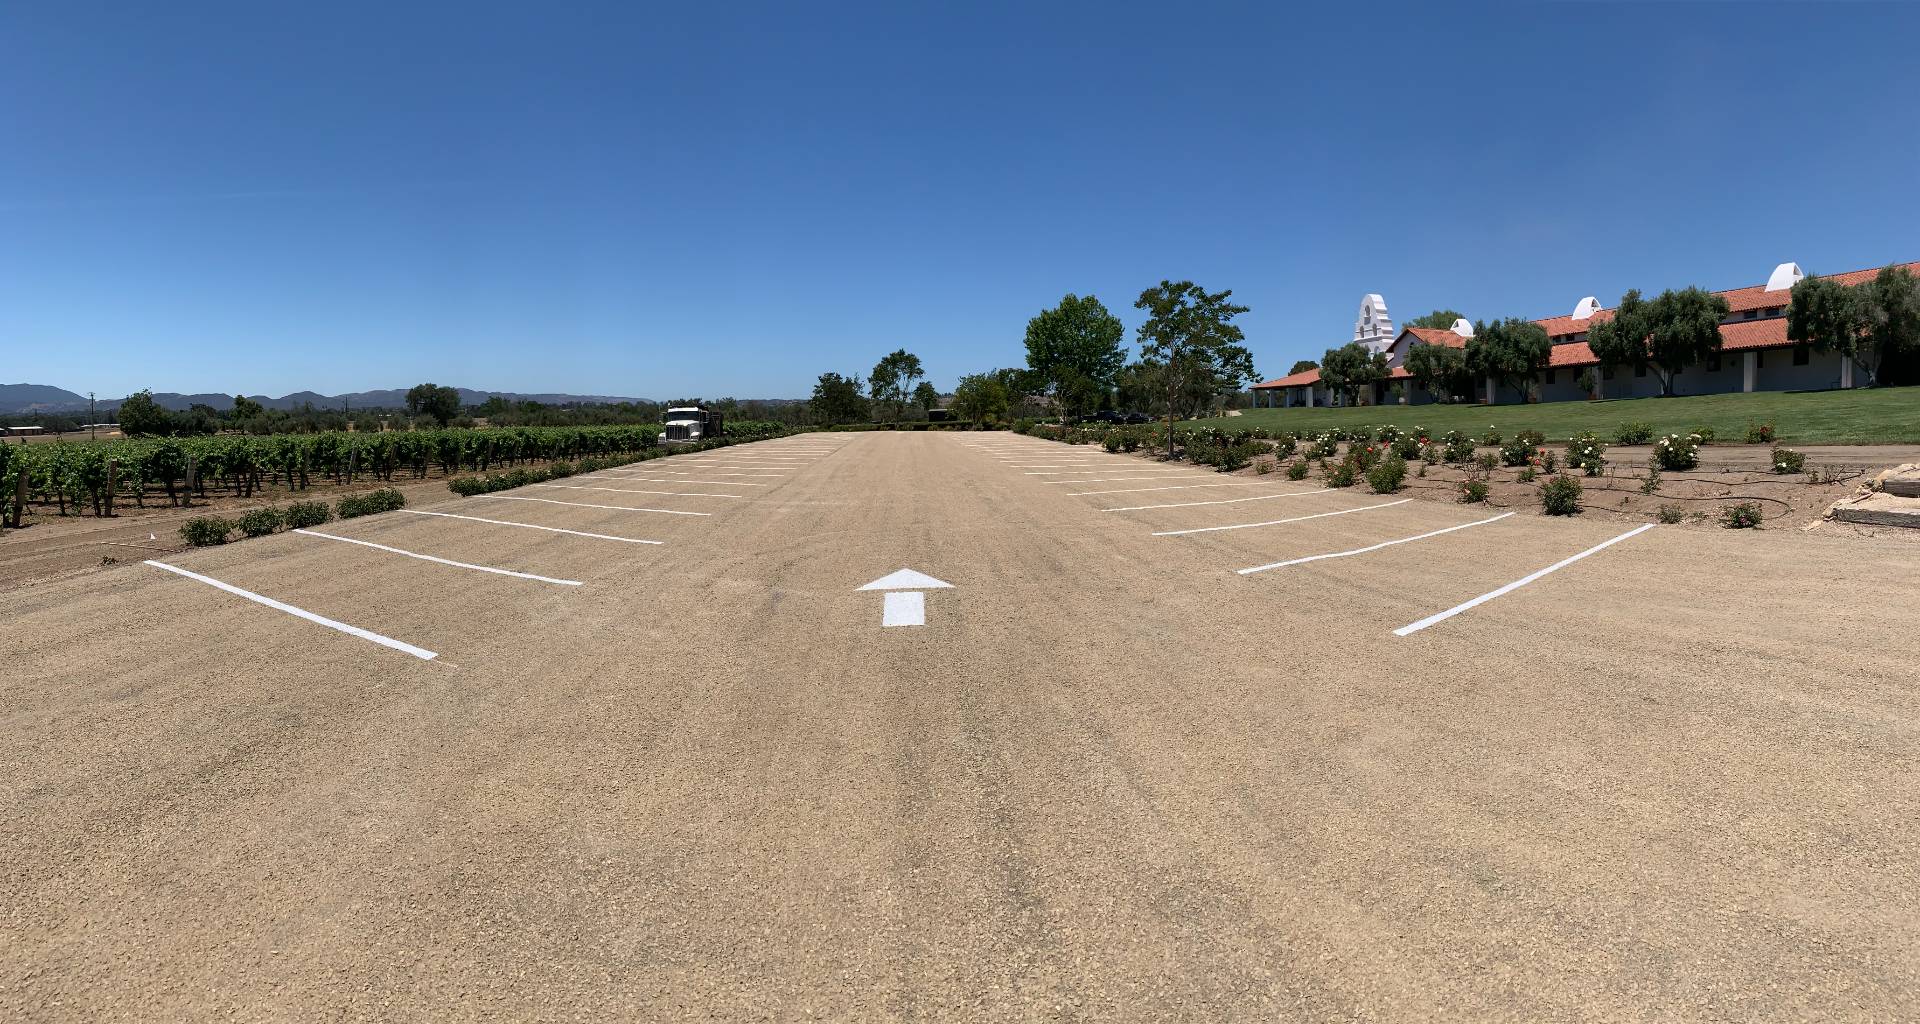 Chip seal and parking lot striping project by GPM in Santa Ynez, CA.